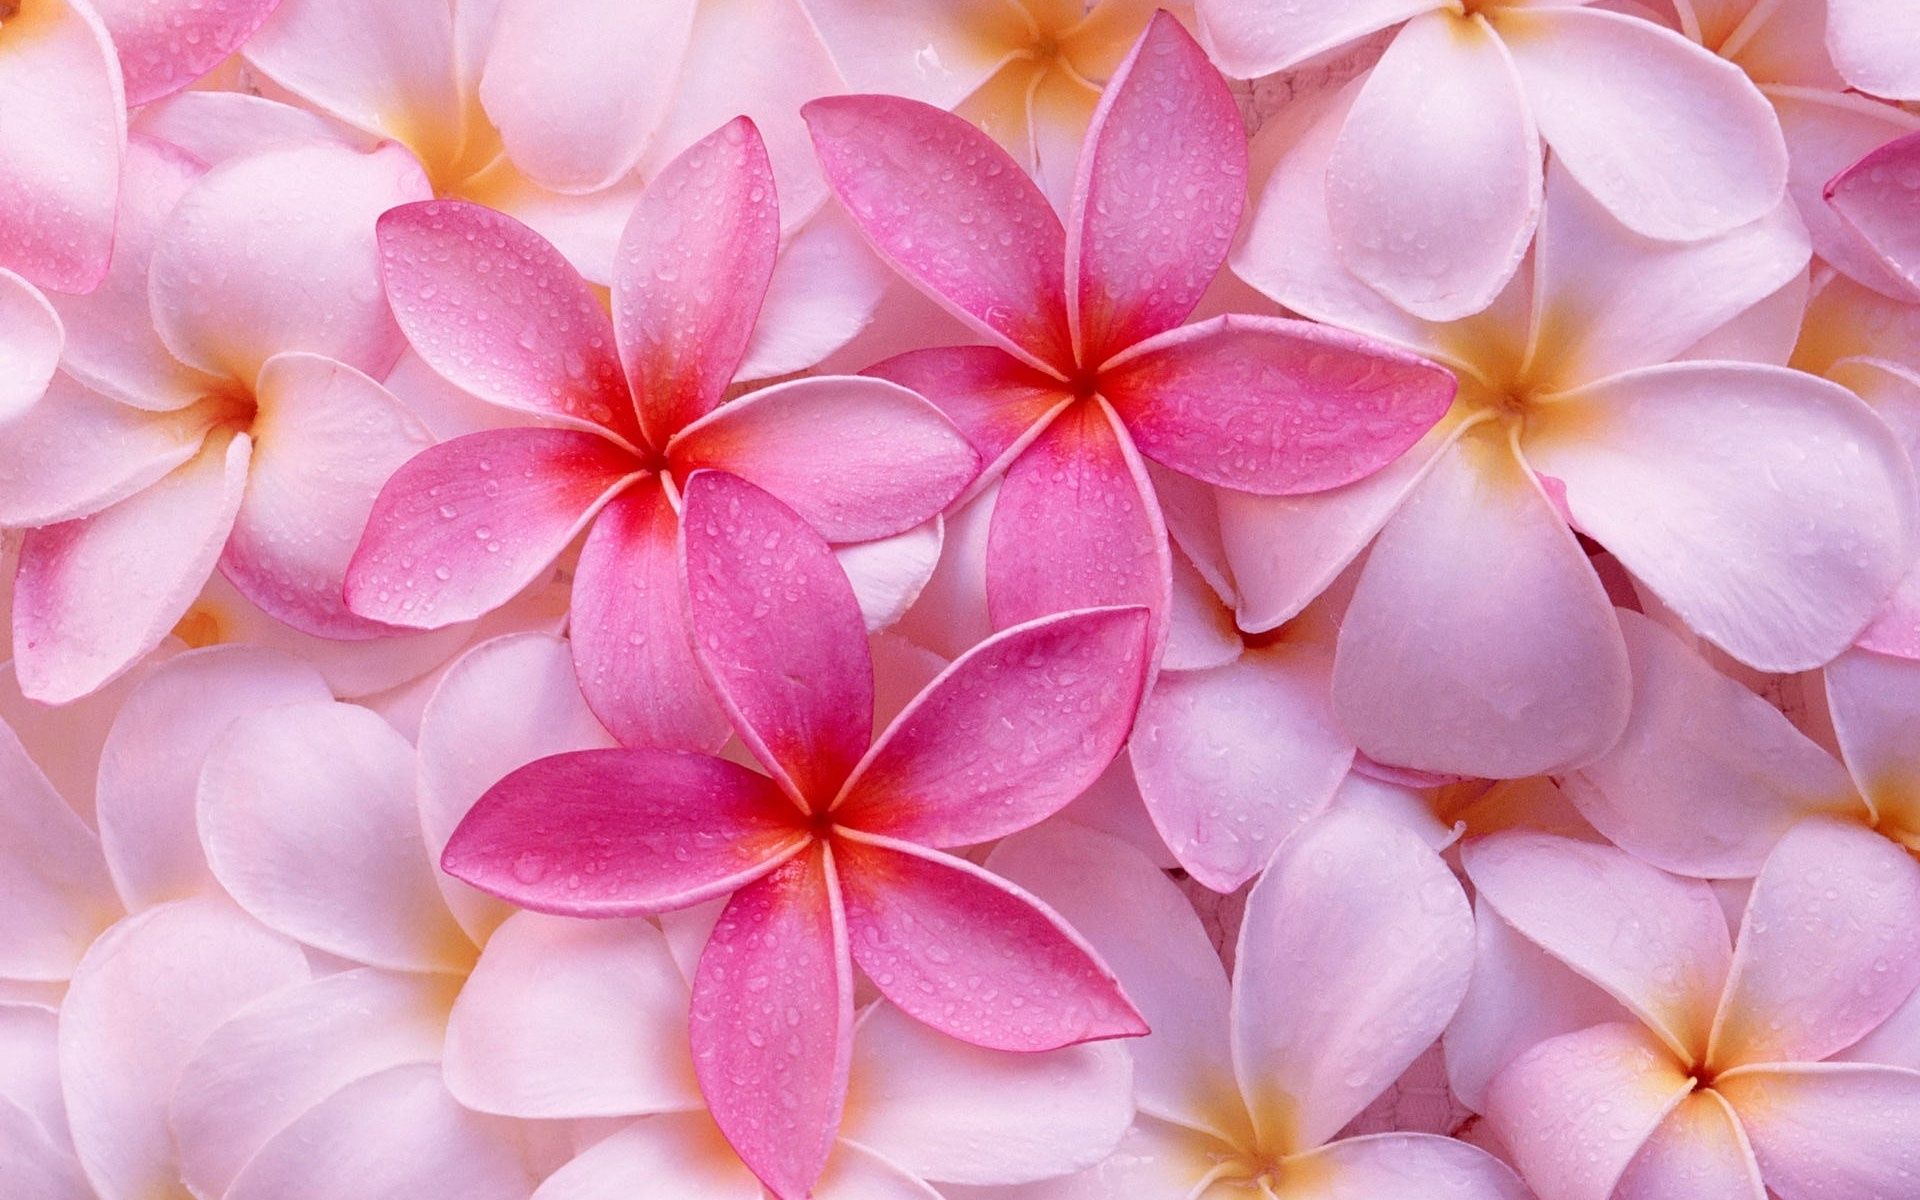 Tropical flowers images and wallpapers Download